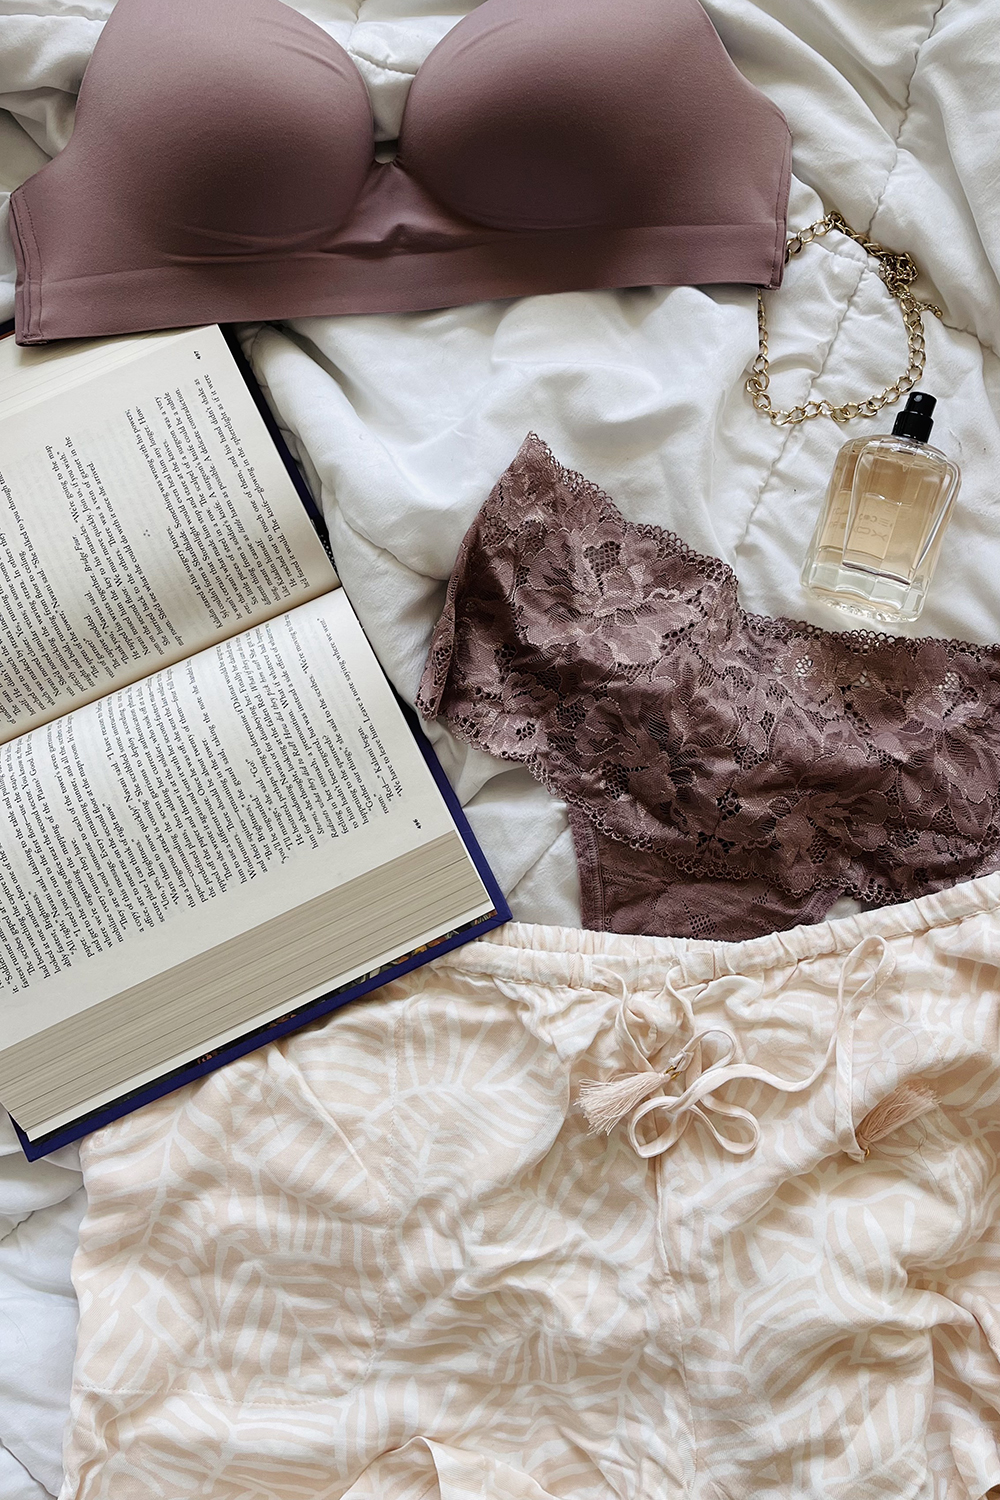 packing for a trip | intimate wear, shorts, a book, and perfume on a bed